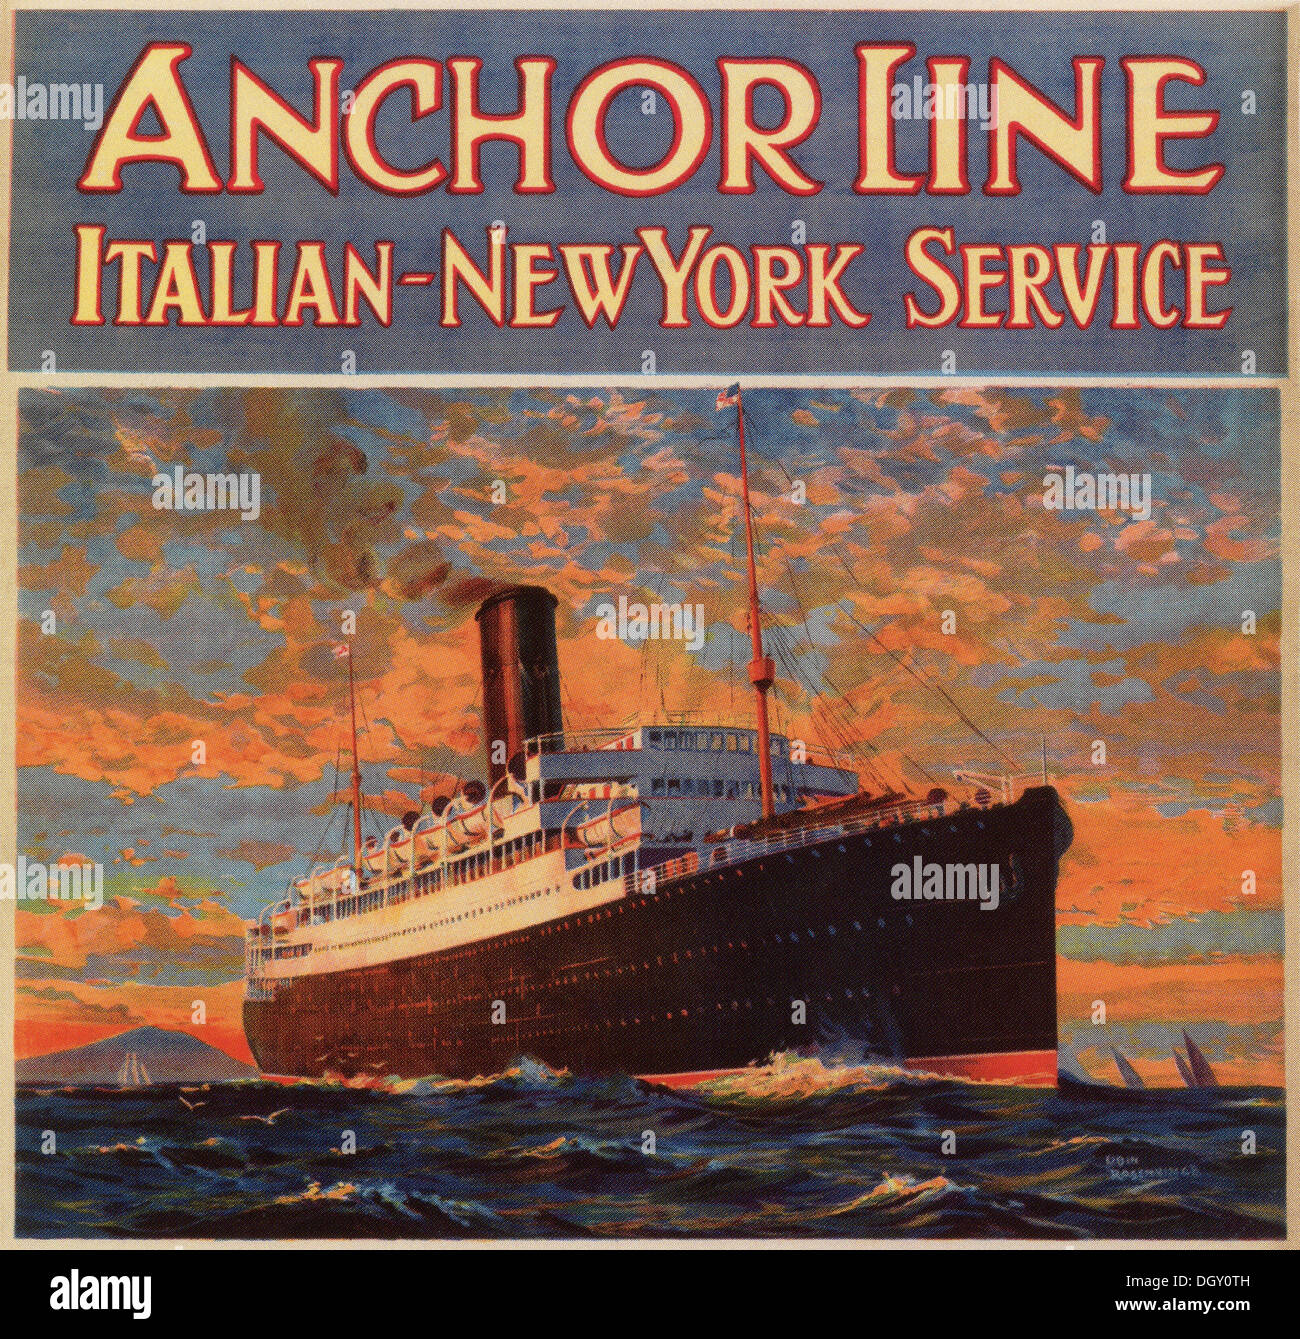 Anchor Line ad vintage travel poster, 1920's - Editorial use only. Stock Photo